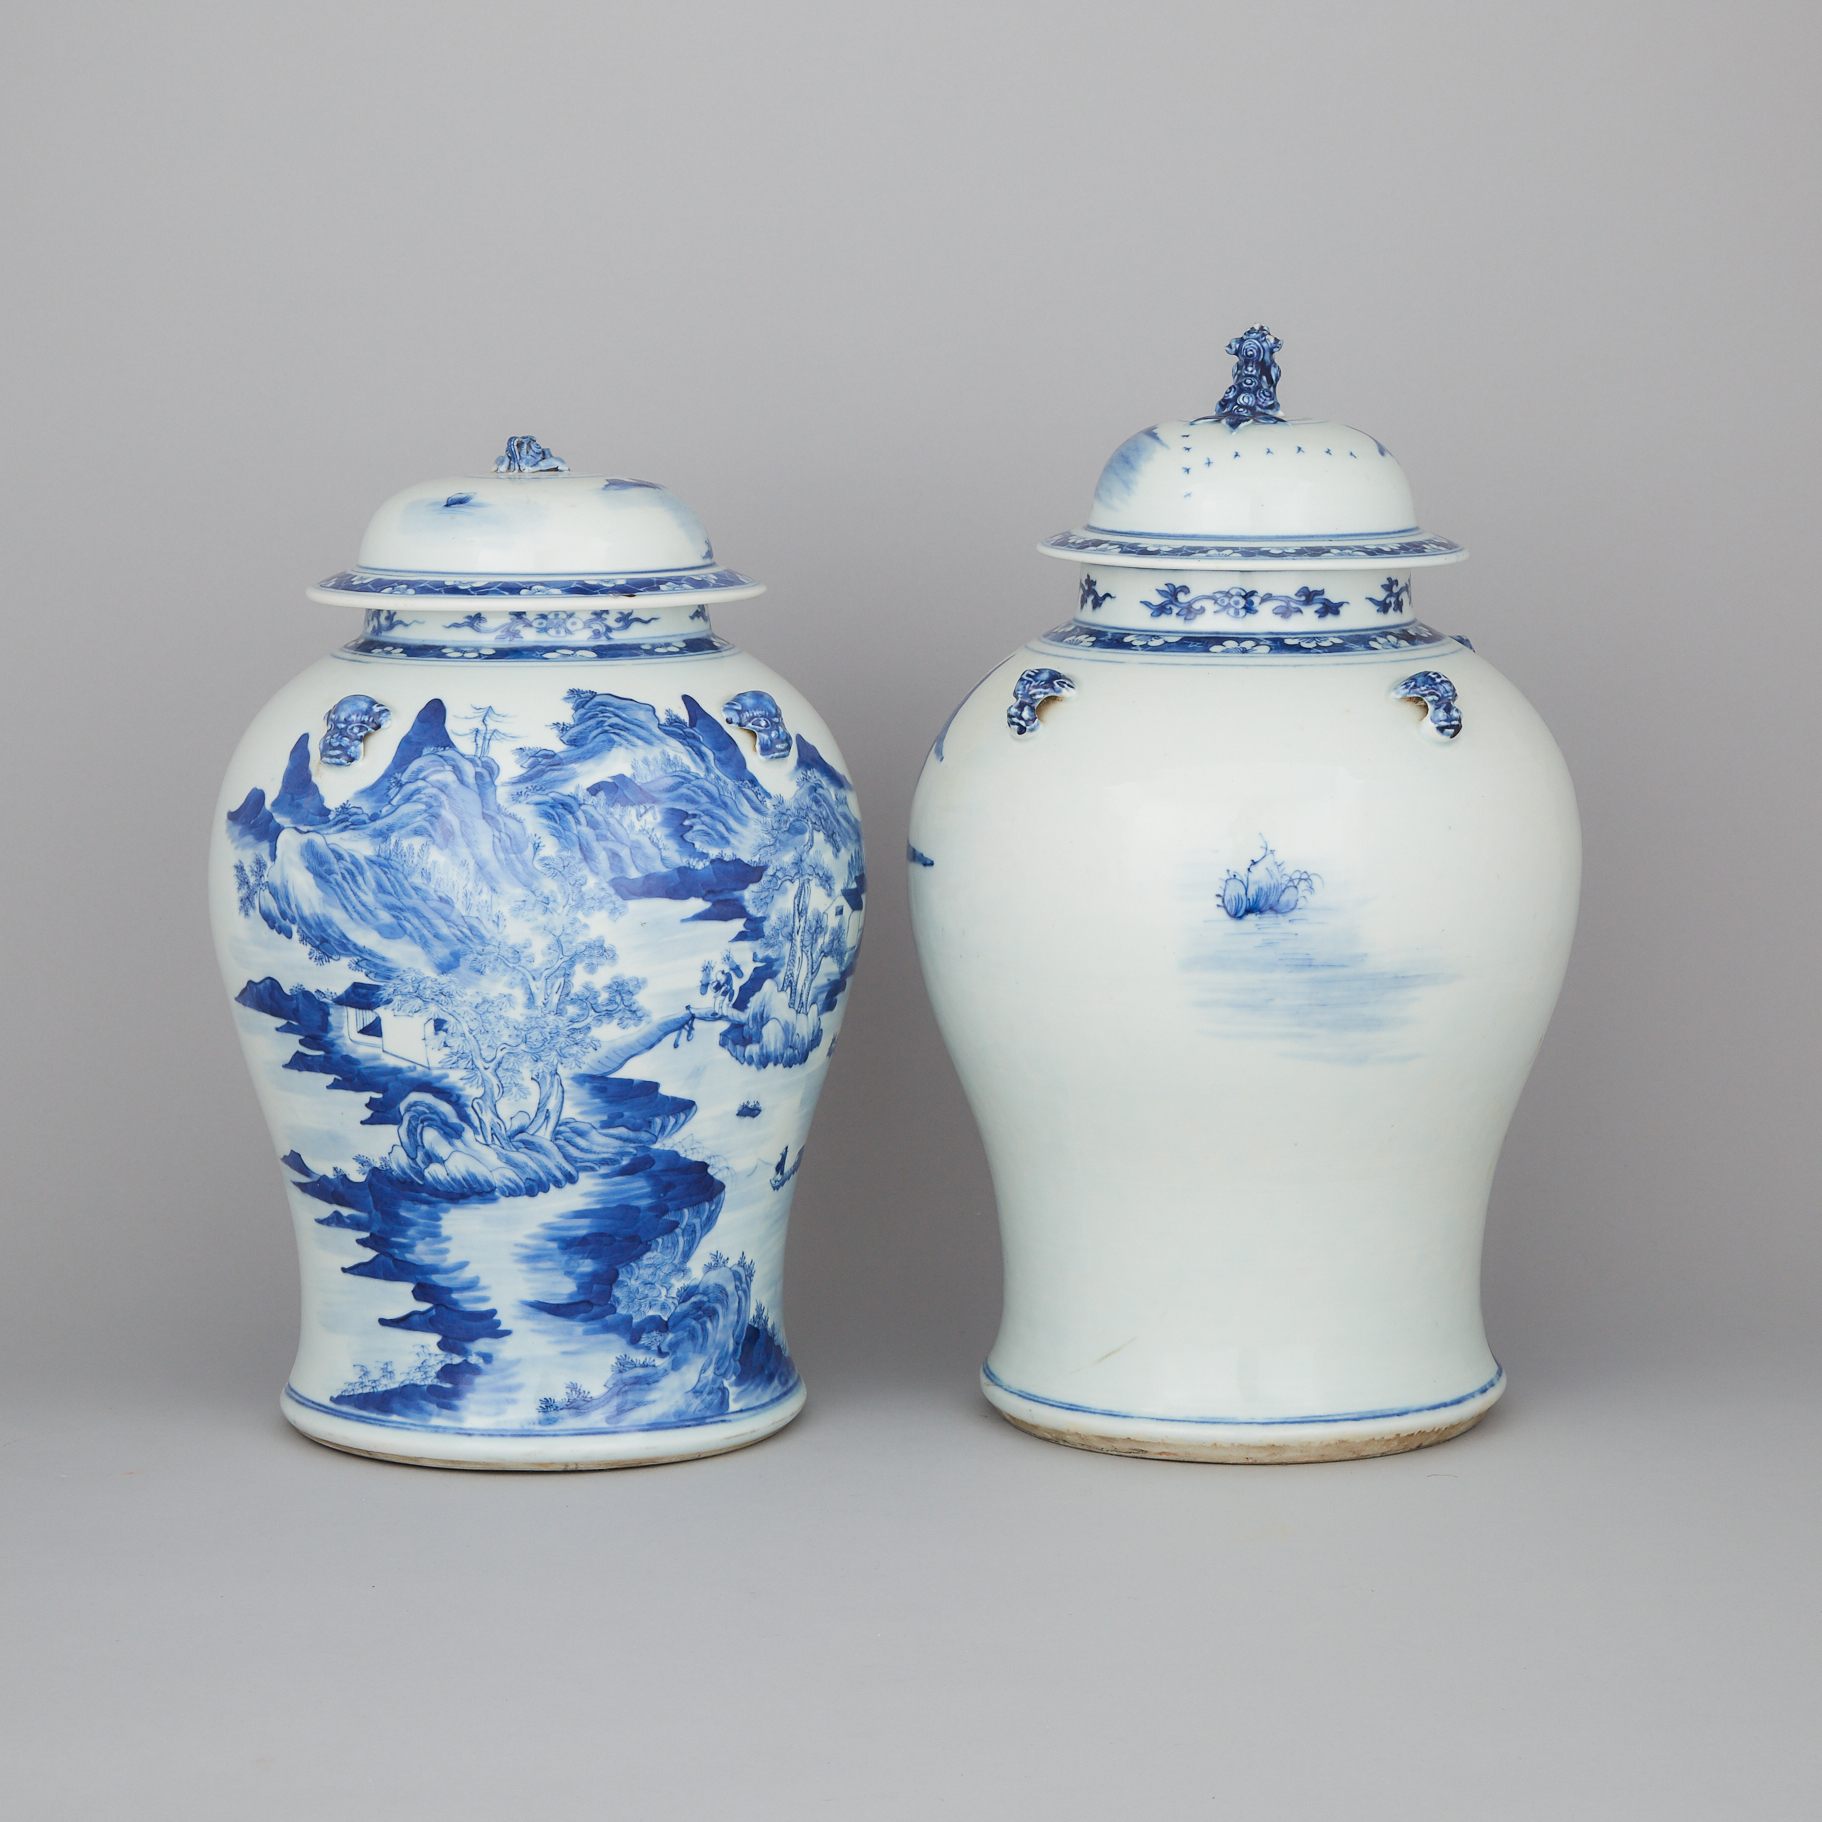 A Pair of Large Blue and White Lidded Temple Jars, 19th Century